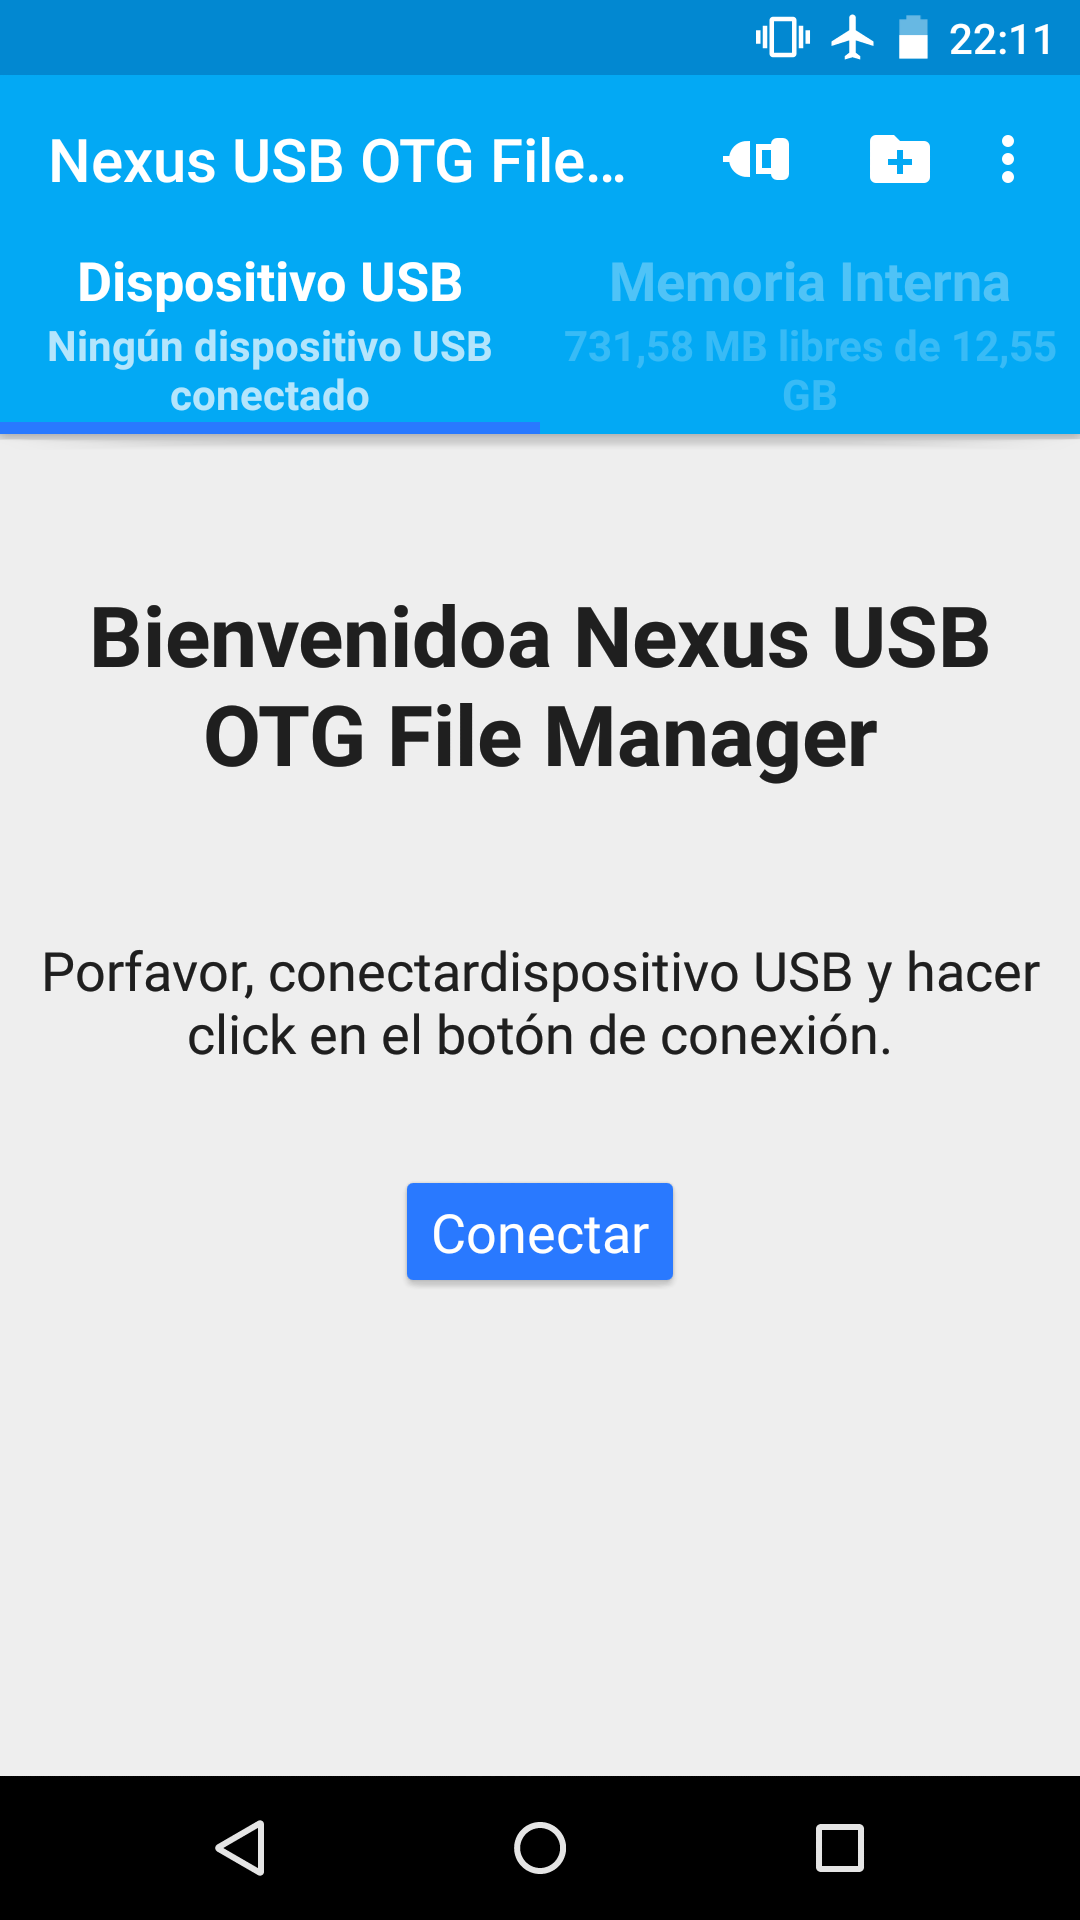 Android application USB OTG File Manager for Nexus screenshort